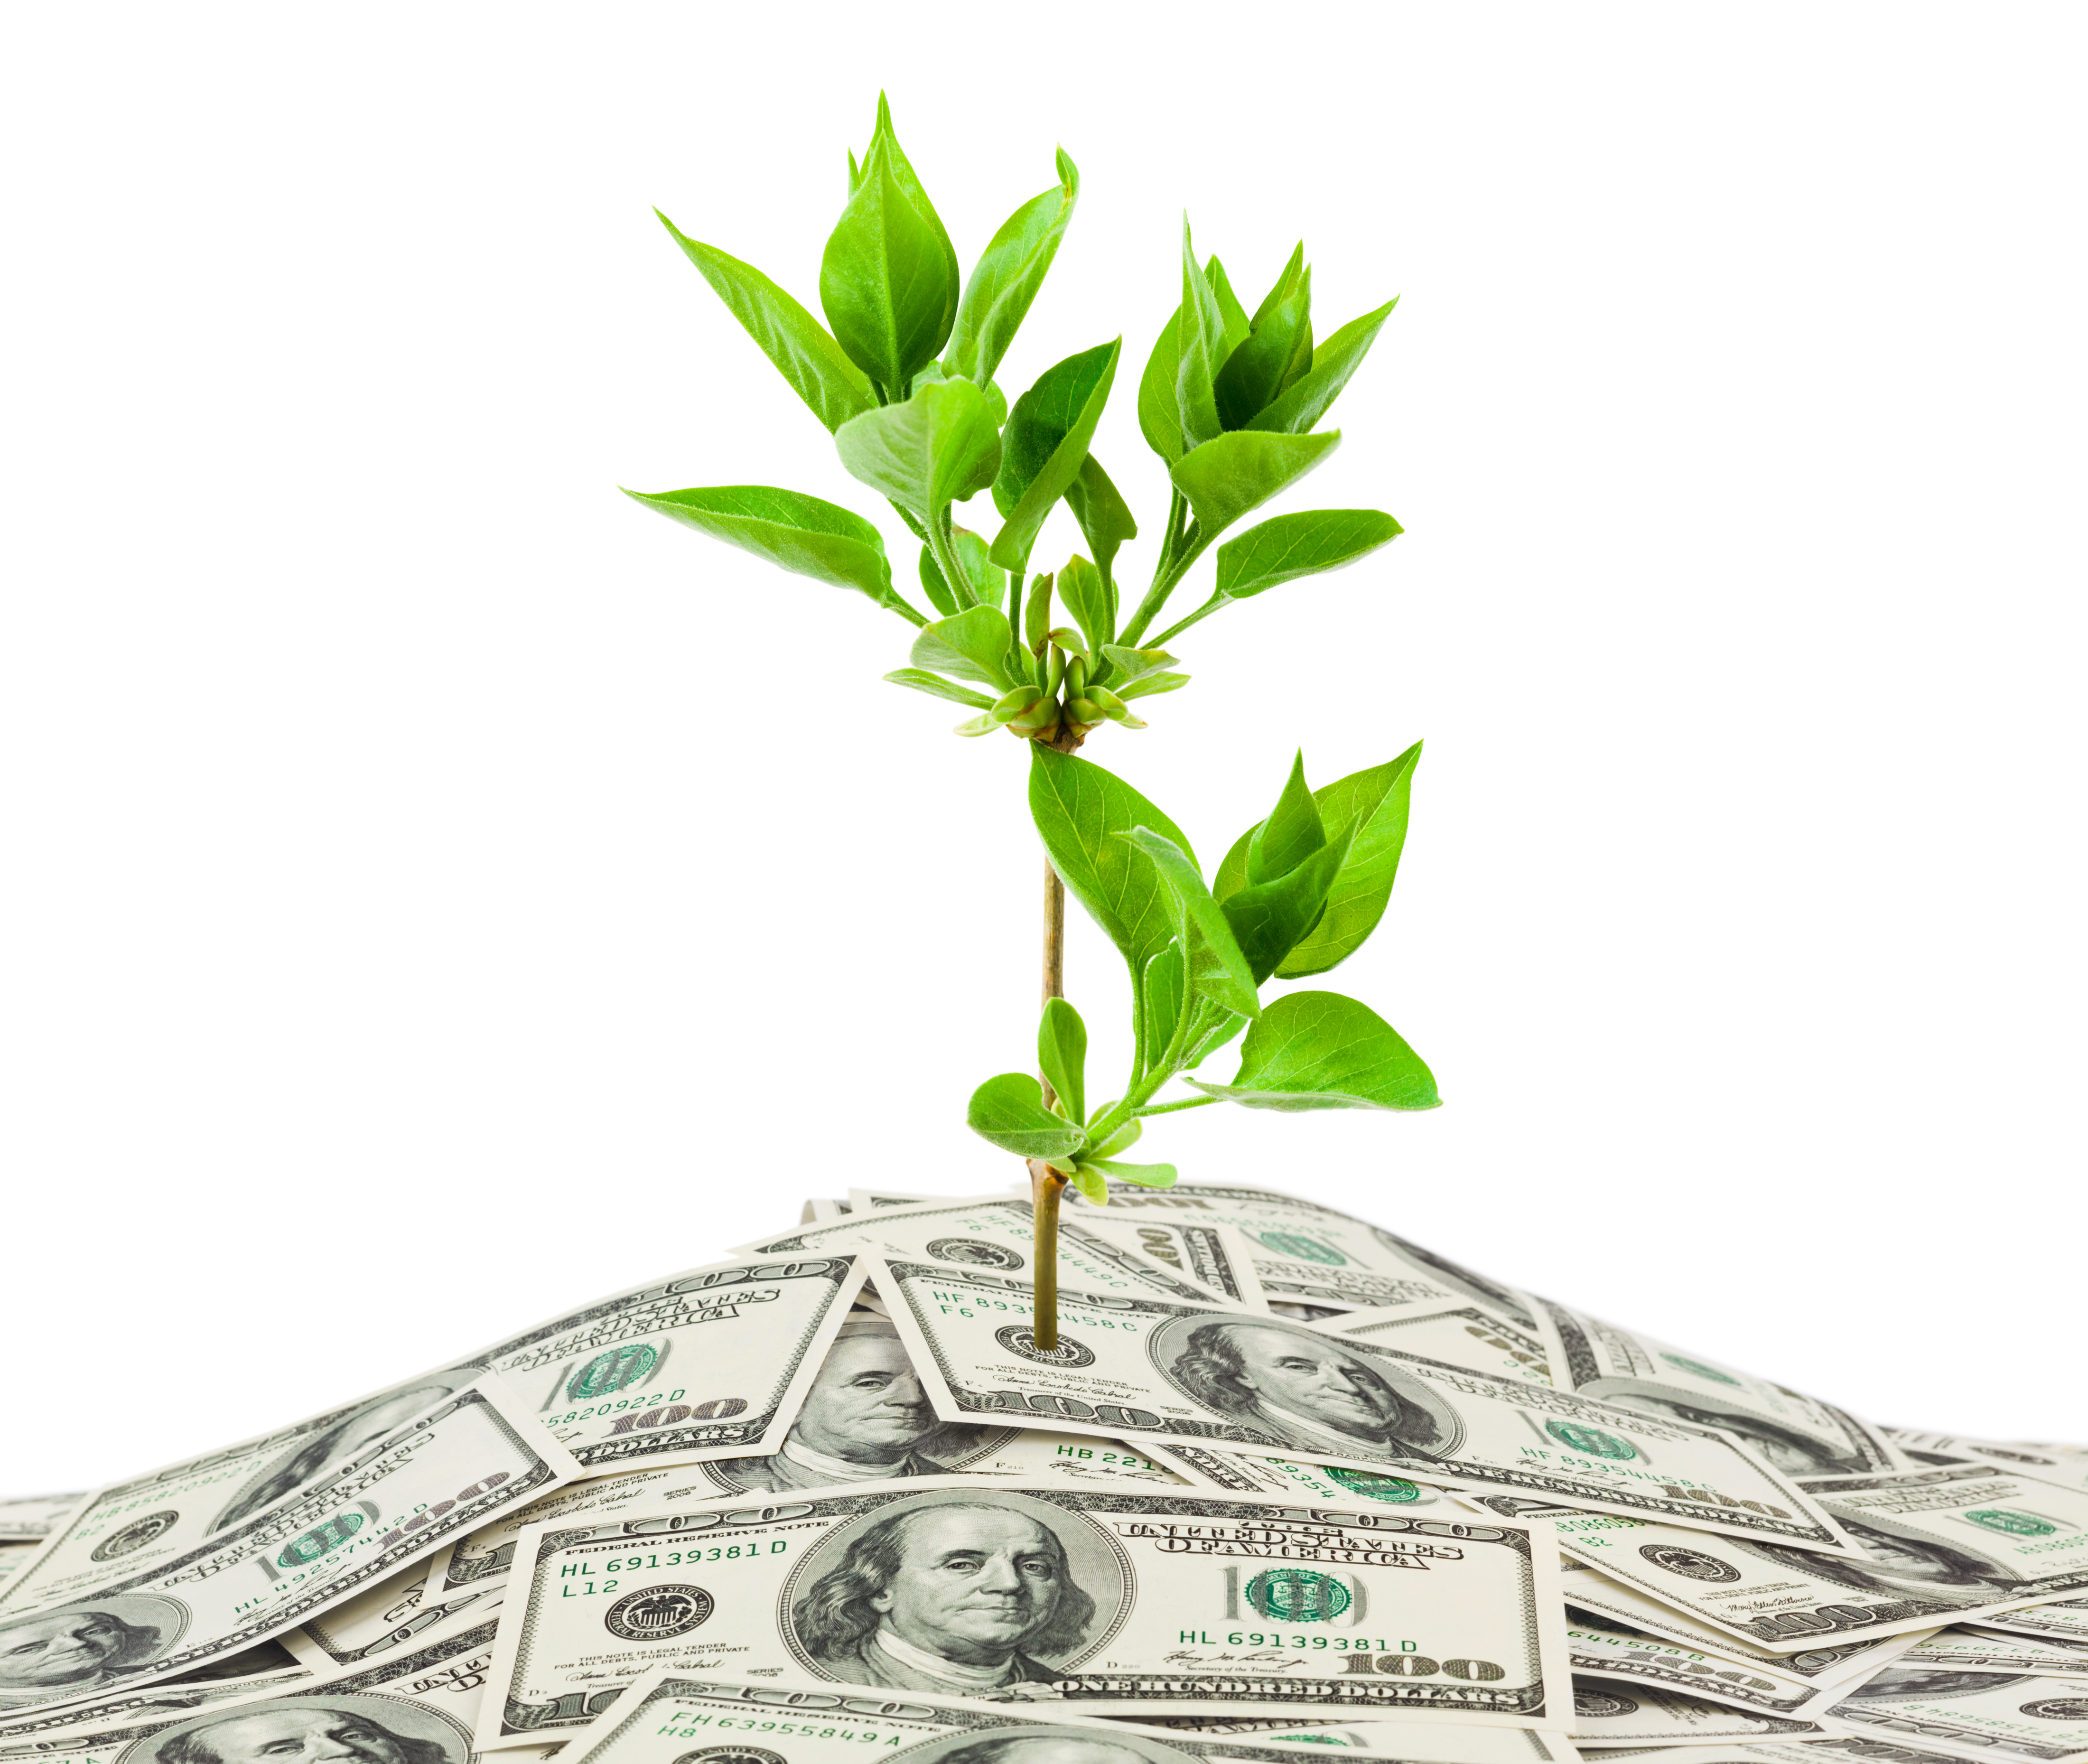 Plant growing from pile of money